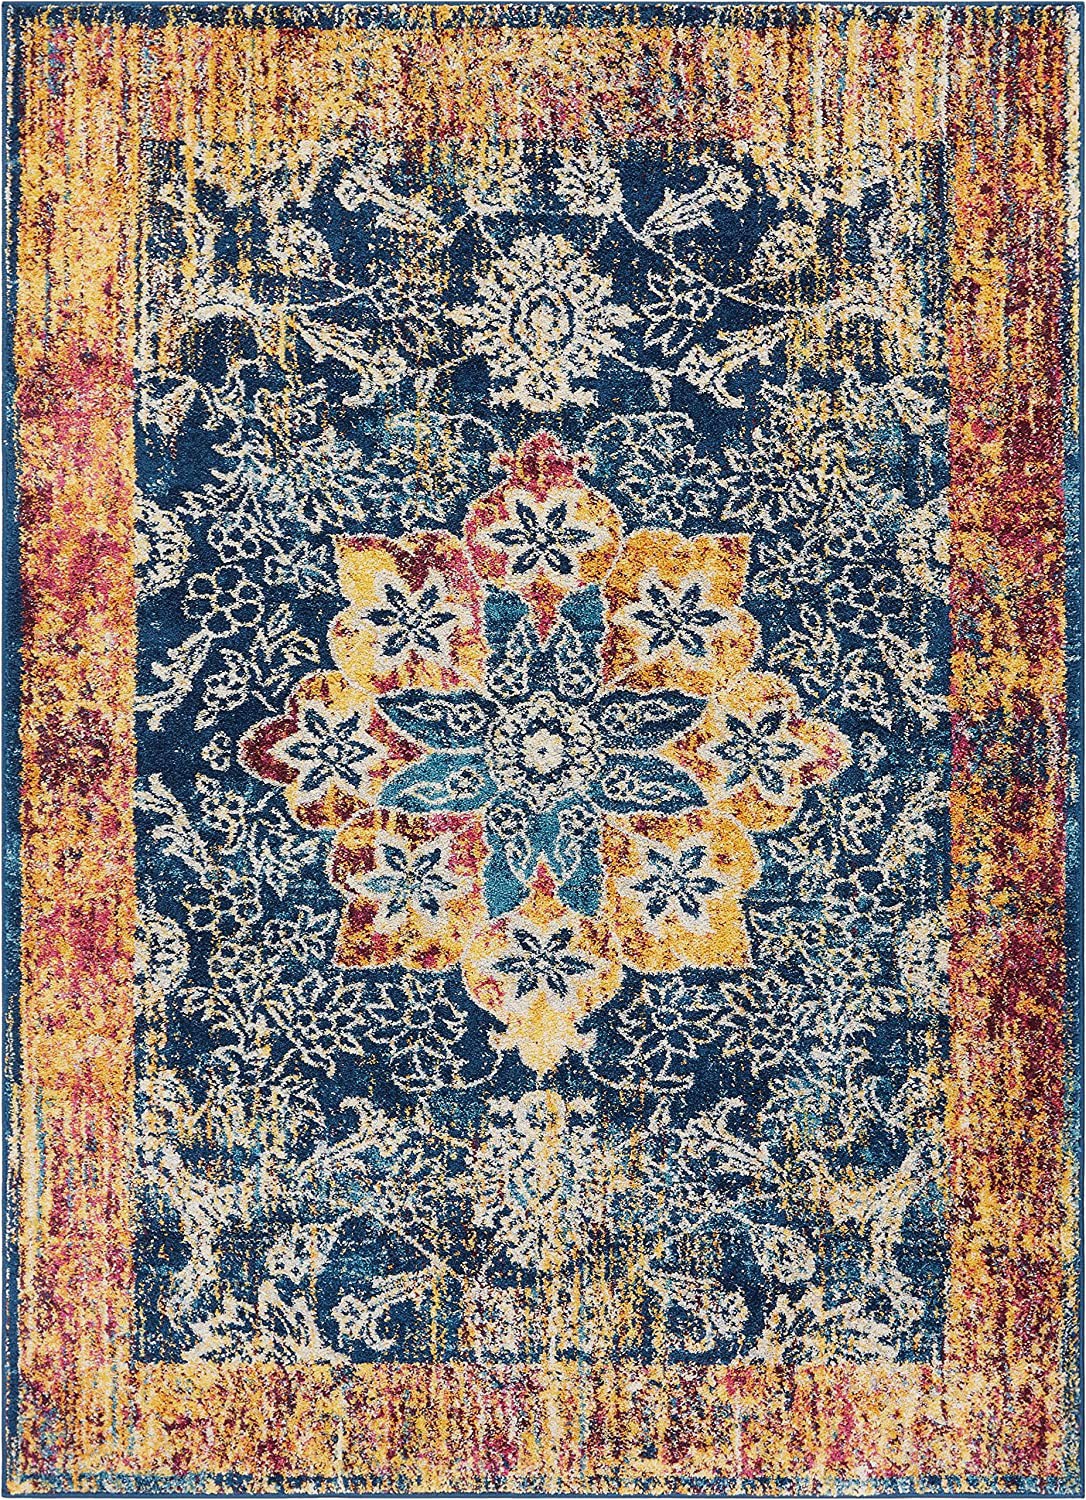 5×7 area Rugs at Lowes Well Woven Cora Floral Medallion Vintage Blue area Rug 5×7 5 3" X 7 3" soft Plush Modern oriental Carpet